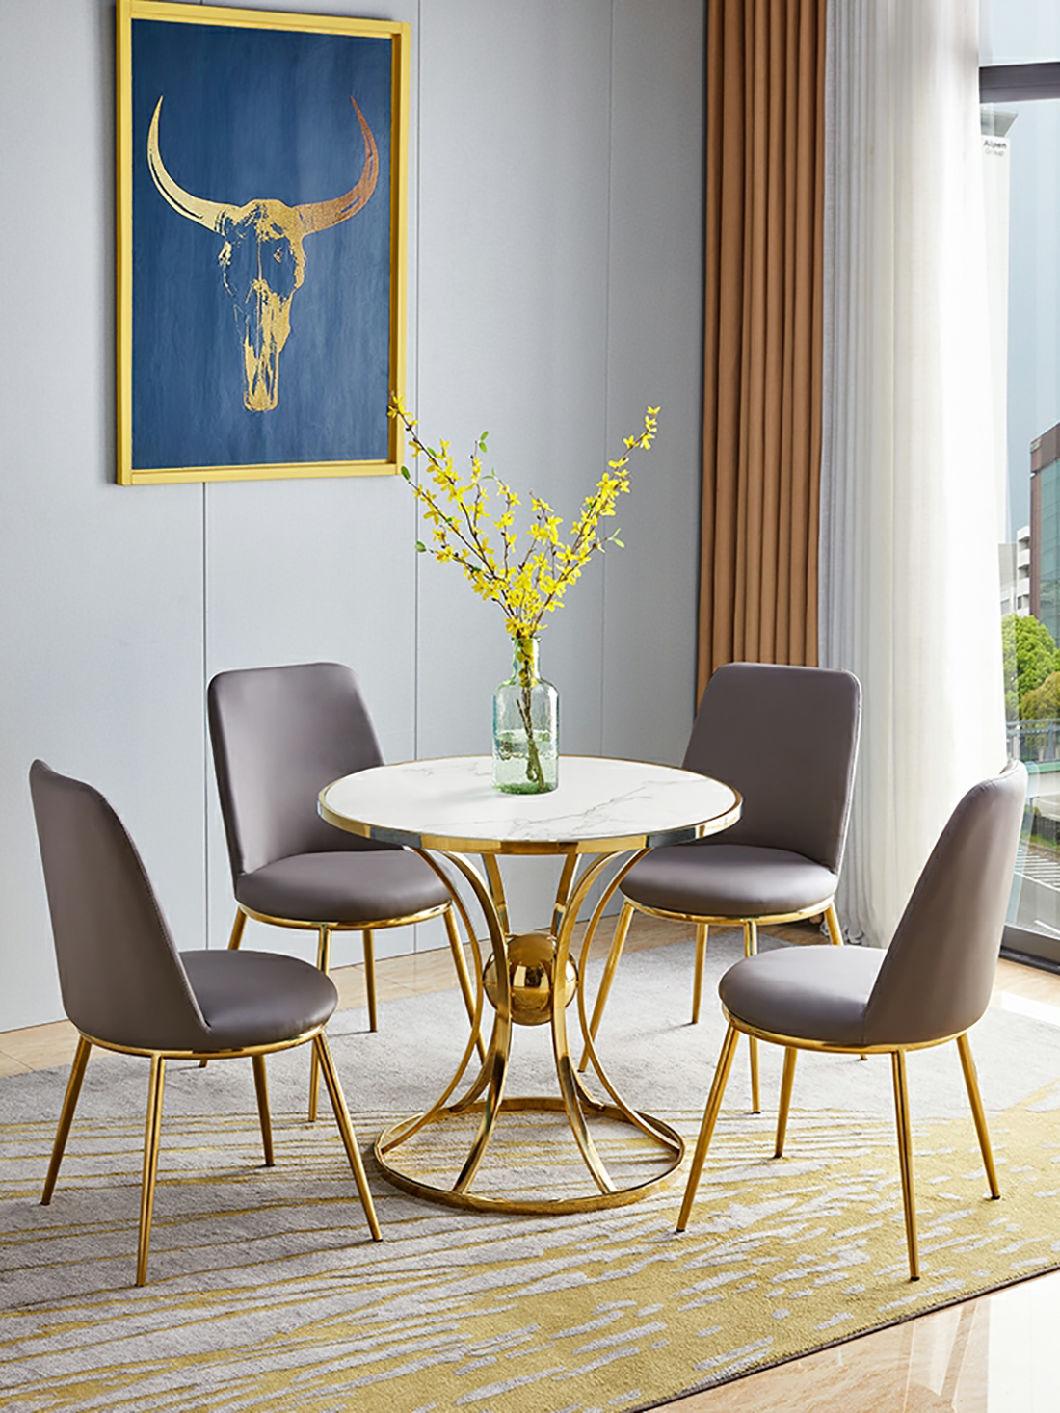 Yc-F097b Luxury Dining Room Furniture Modern Chair for Sale